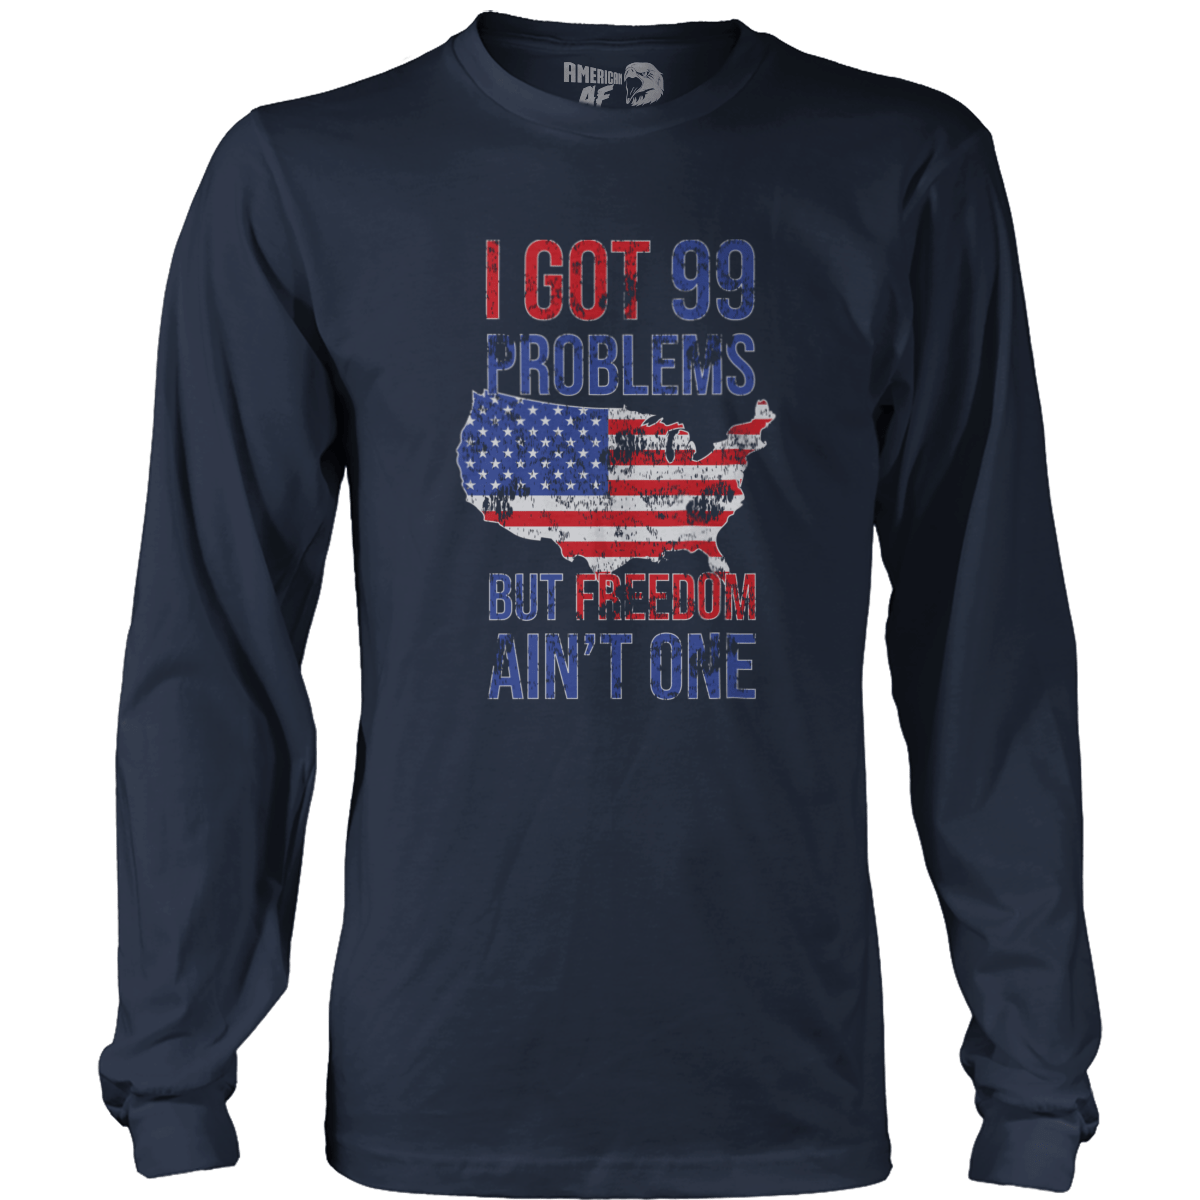 T-shirt Mens Long Sleeve / Midnight Navy / S I Got 99 Problems But Freedom Ain't One